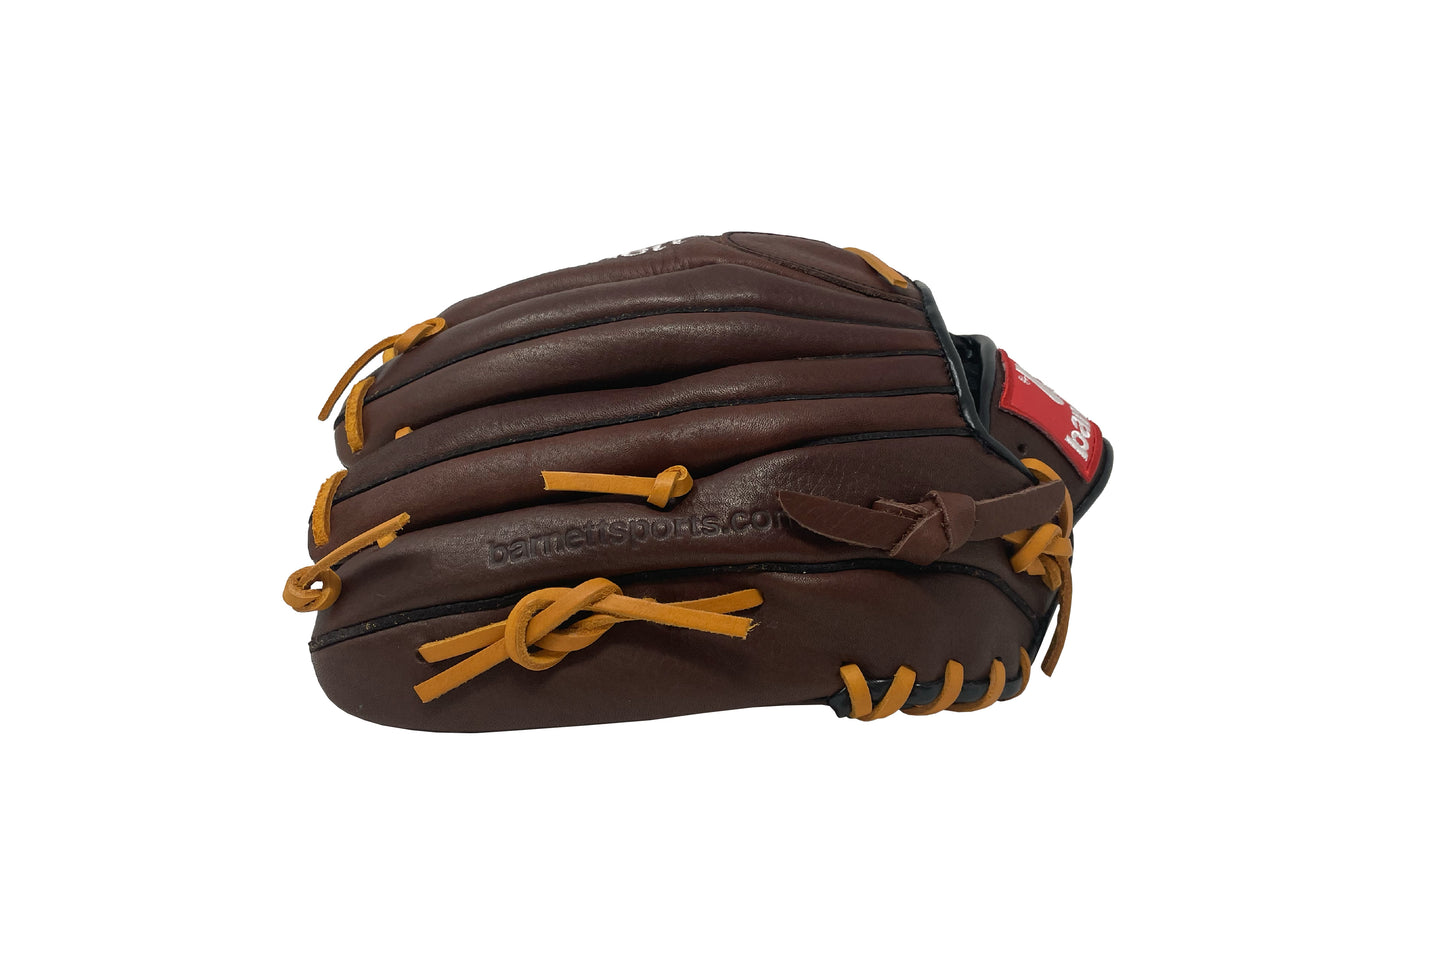 GL-125 Competition baseball glove, genuine leather, outfield 12.5, Brown